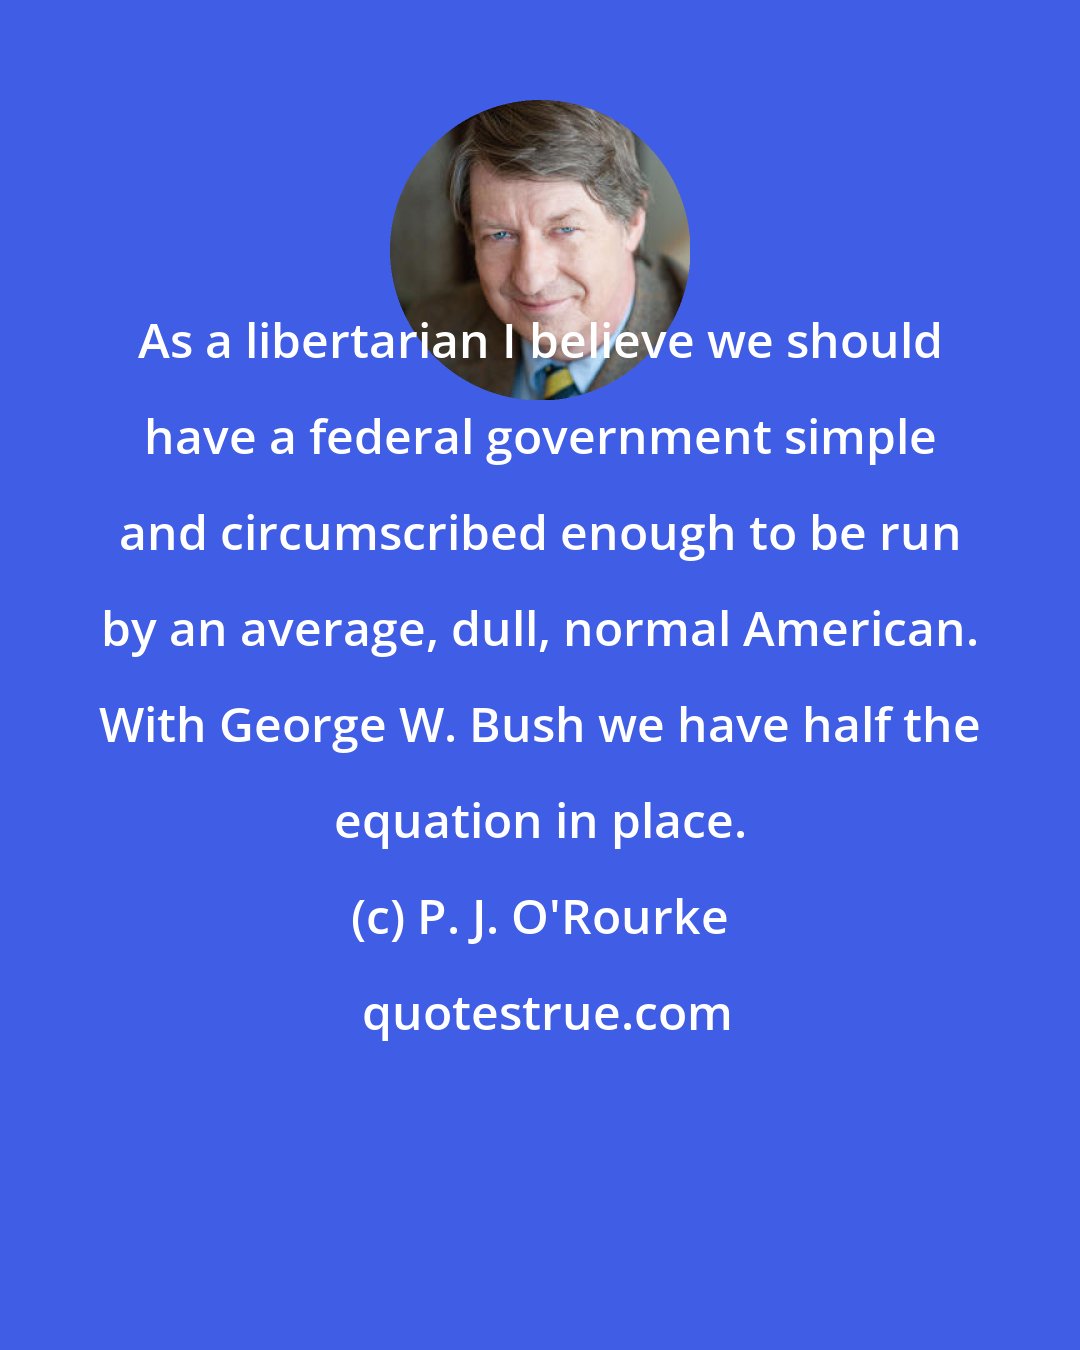 P. J. O'Rourke: As a libertarian I believe we should have a federal government simple and circumscribed enough to be run by an average, dull, normal American. With George W. Bush we have half the equation in place.